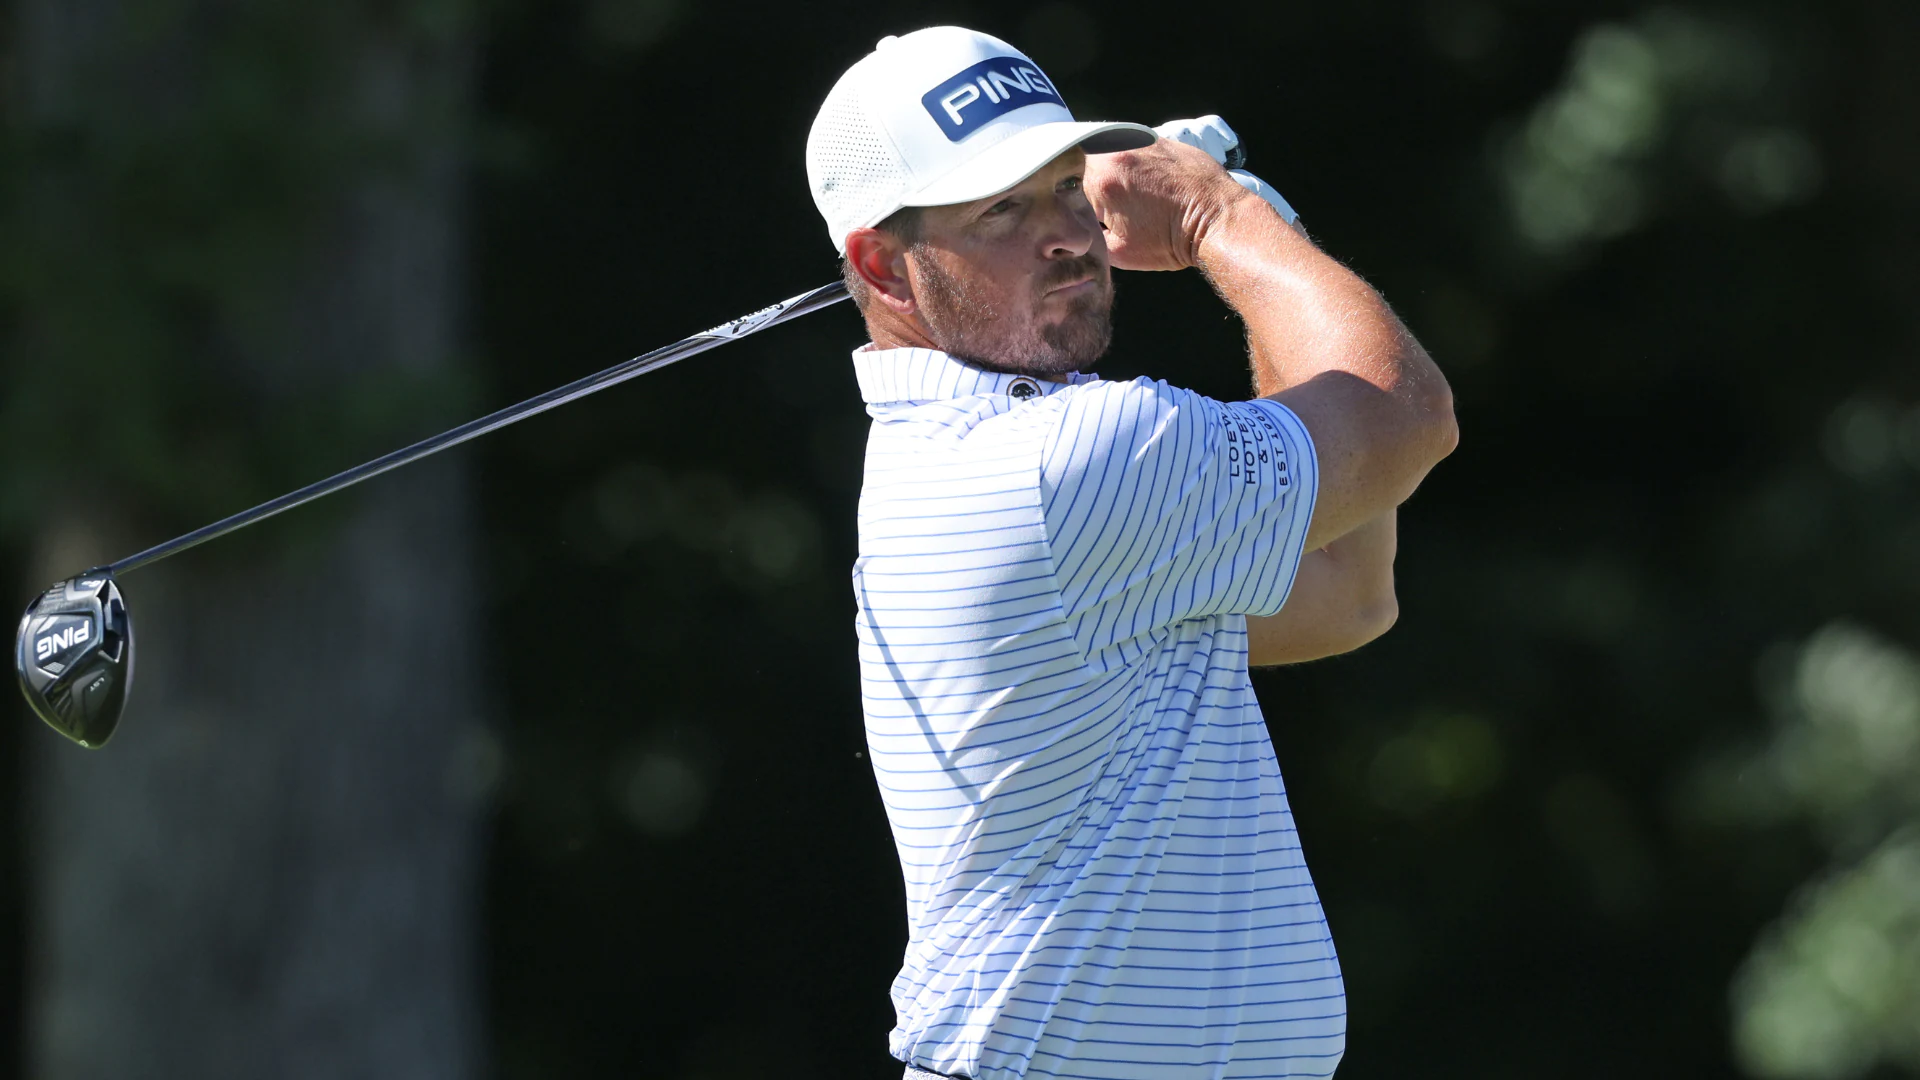 Monday qualifier Chris Naegel in John Deere Classic mix after opening eagle